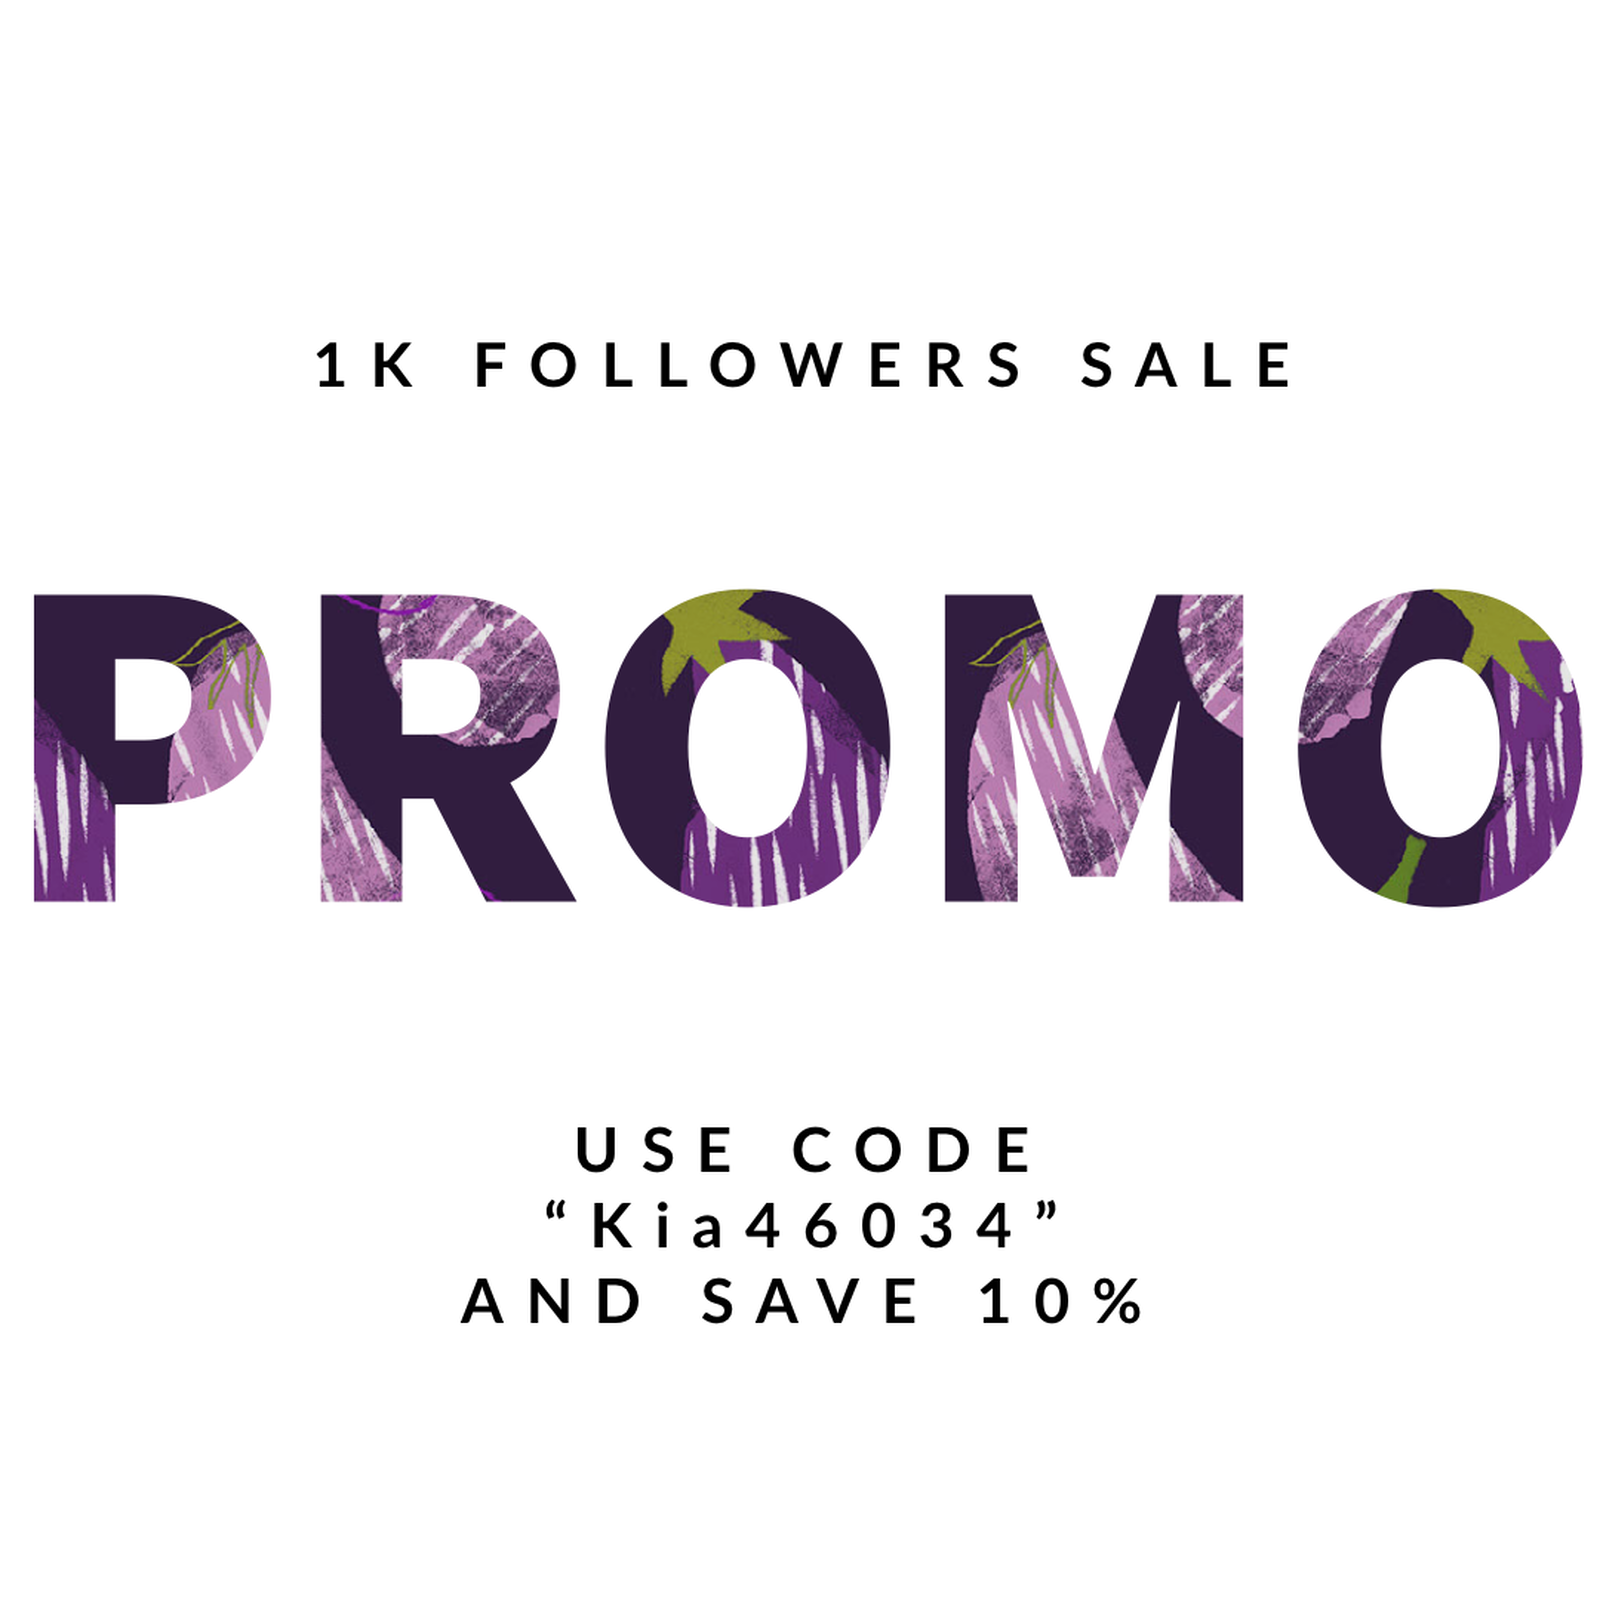 Photo by Kiara Skye with the username @KiaraSkye, who is a star user,  September 4, 2020 at 1:05 AM and the text says '✨ WE MADE IT TO 1K FOLLOWERS ON MANYVIDS! 

🛍 Get 10% off VIDS and MV CRUSH with code Kia46034  

🎟 Only valid through September 6th! 🎟  

https://KiaraSkye.manyvids.com  https://KiaraSkye.manyvids.com/crush'